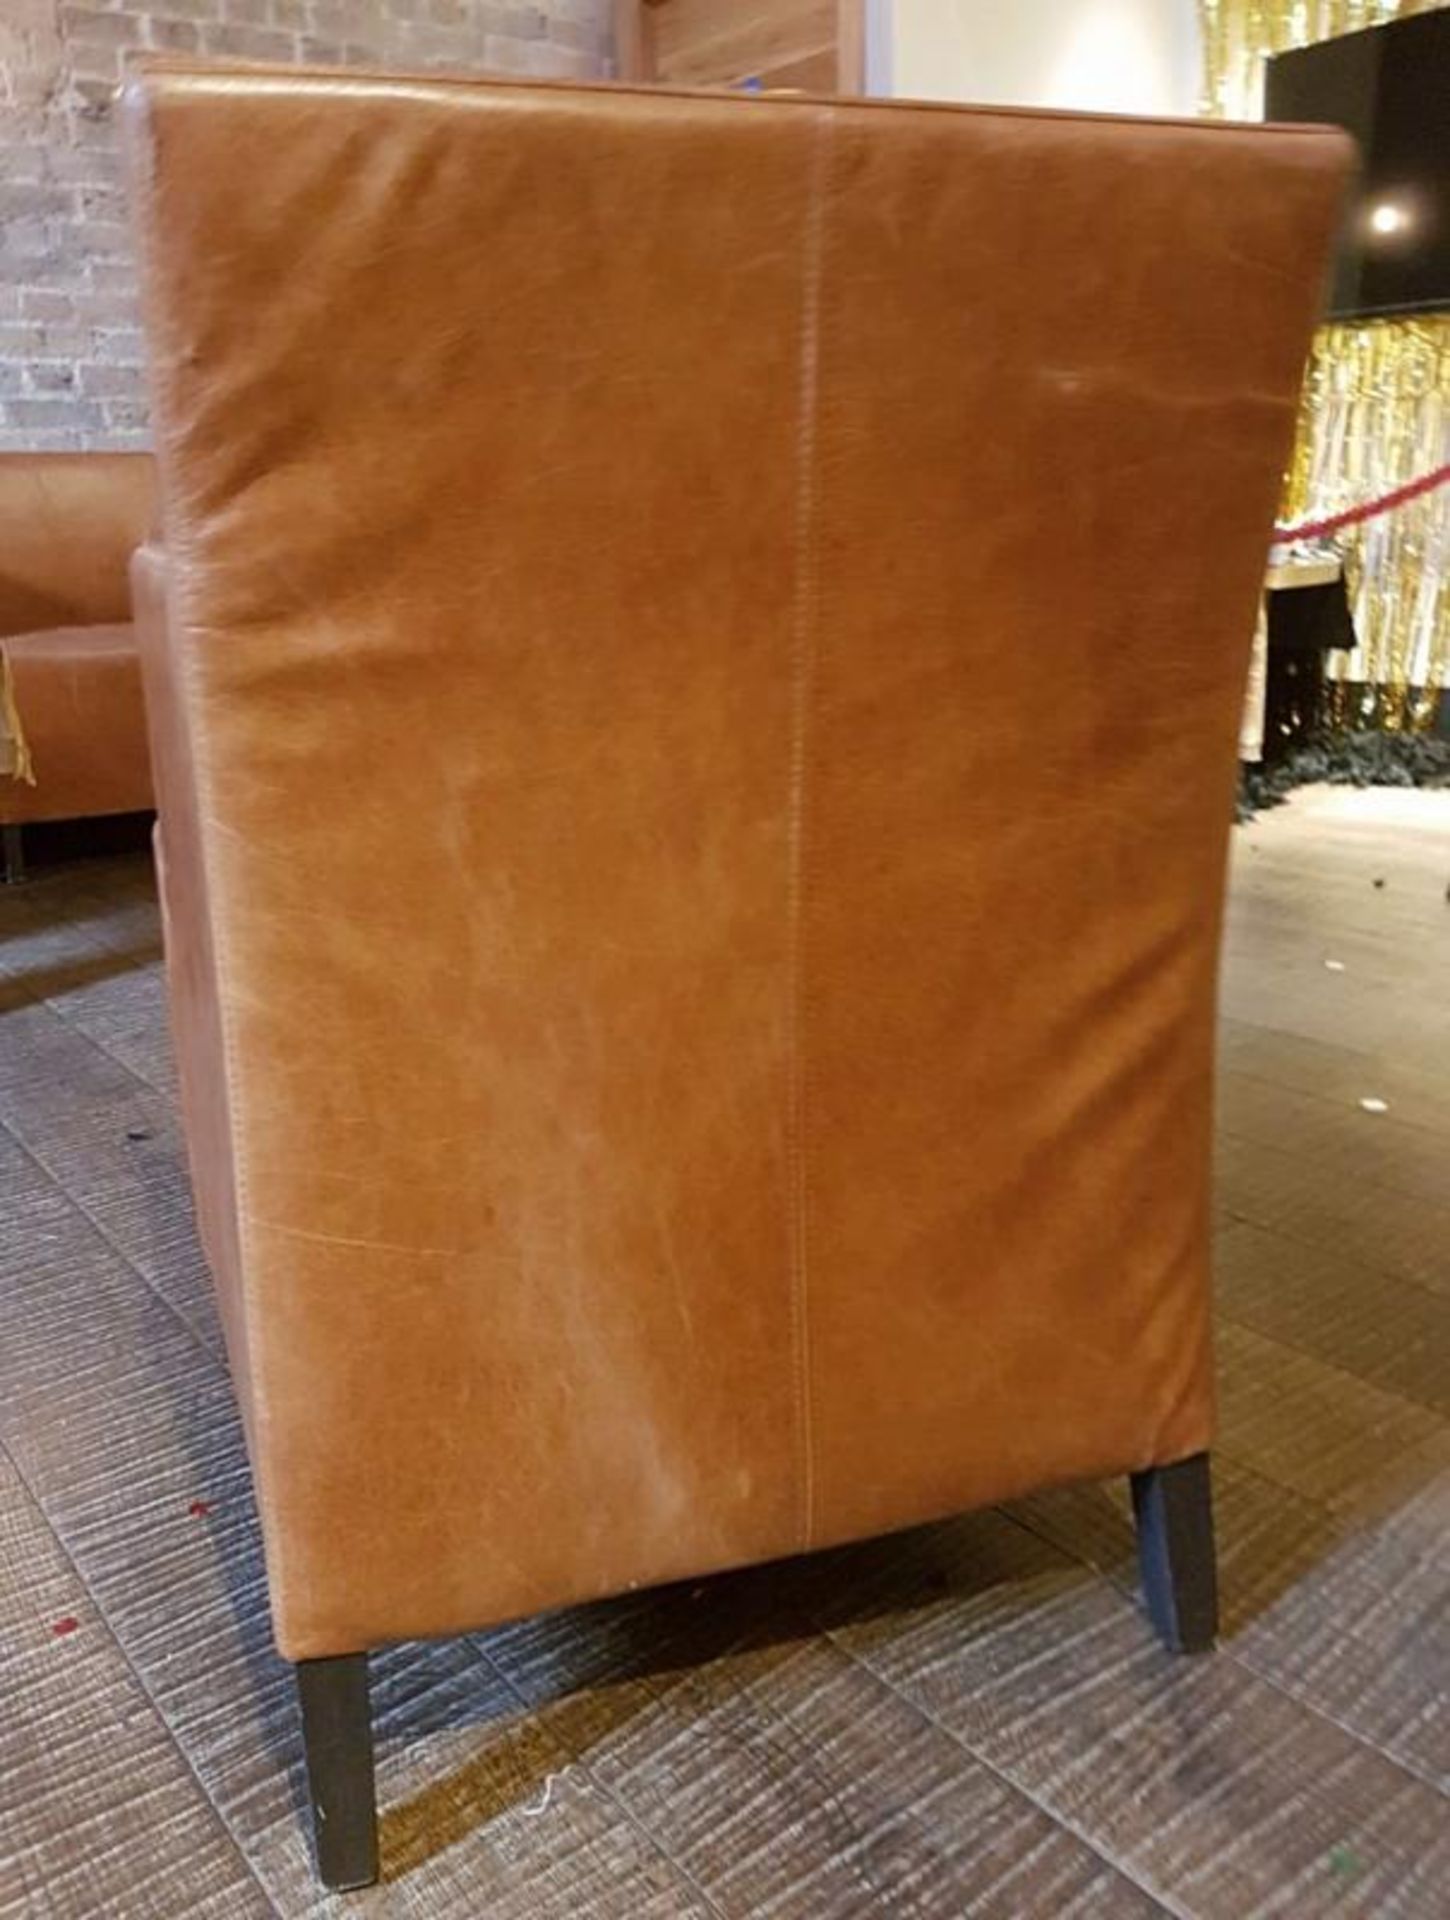 1 x Large Armchair Upholstered In Tan Leather - Recently Removed From A City Centre Steakhouse Resta - Image 5 of 5